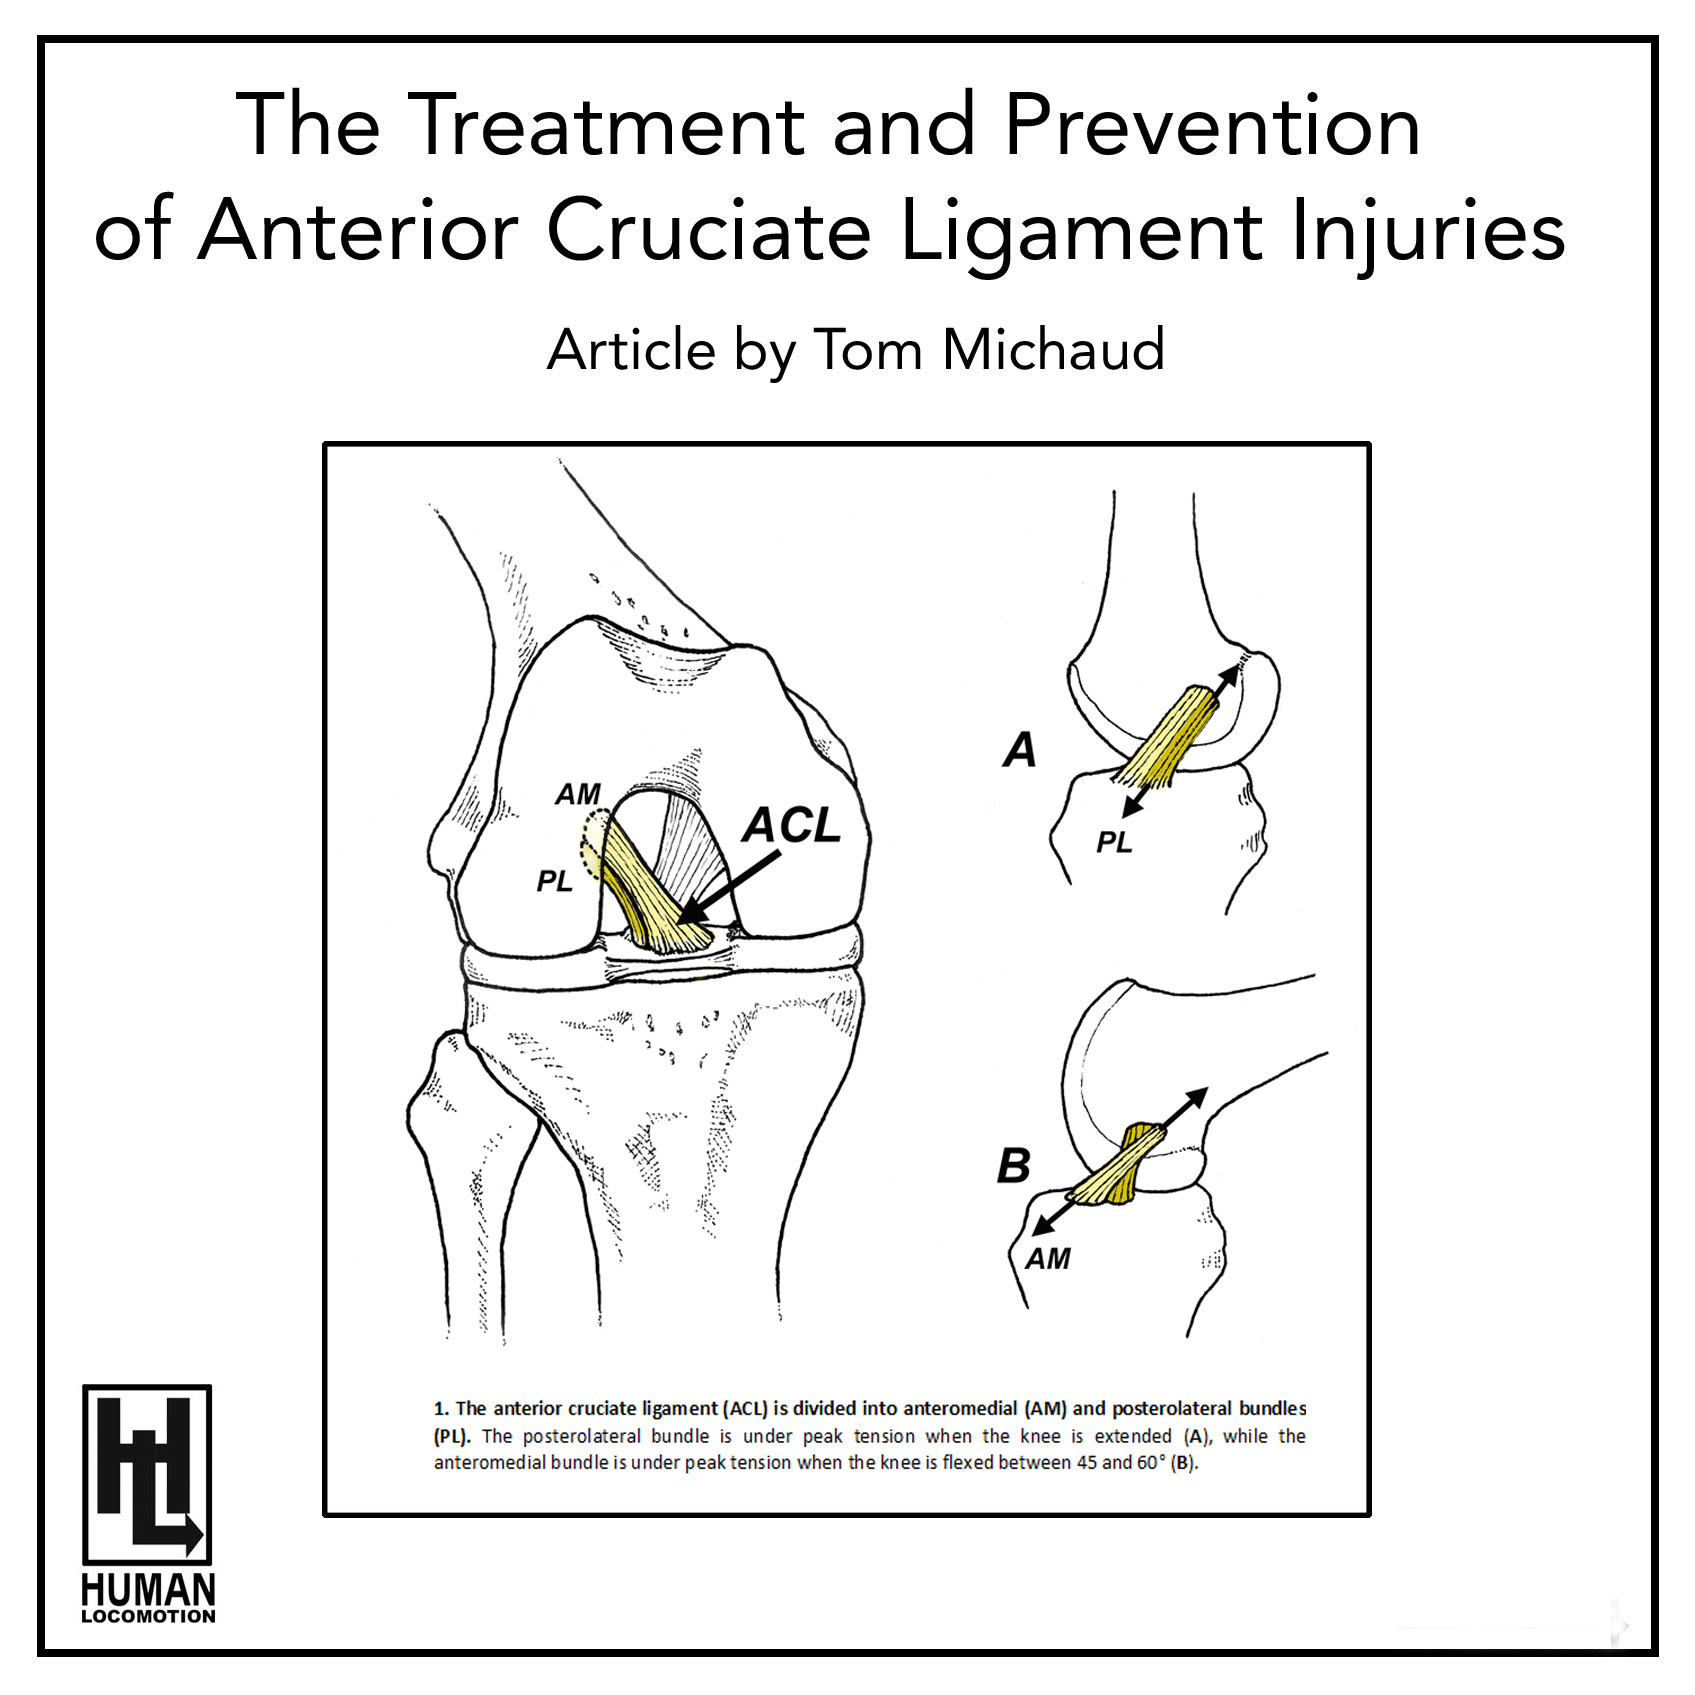 The Treatment and Prevention of Anterior Cruciate Ligament Injuries